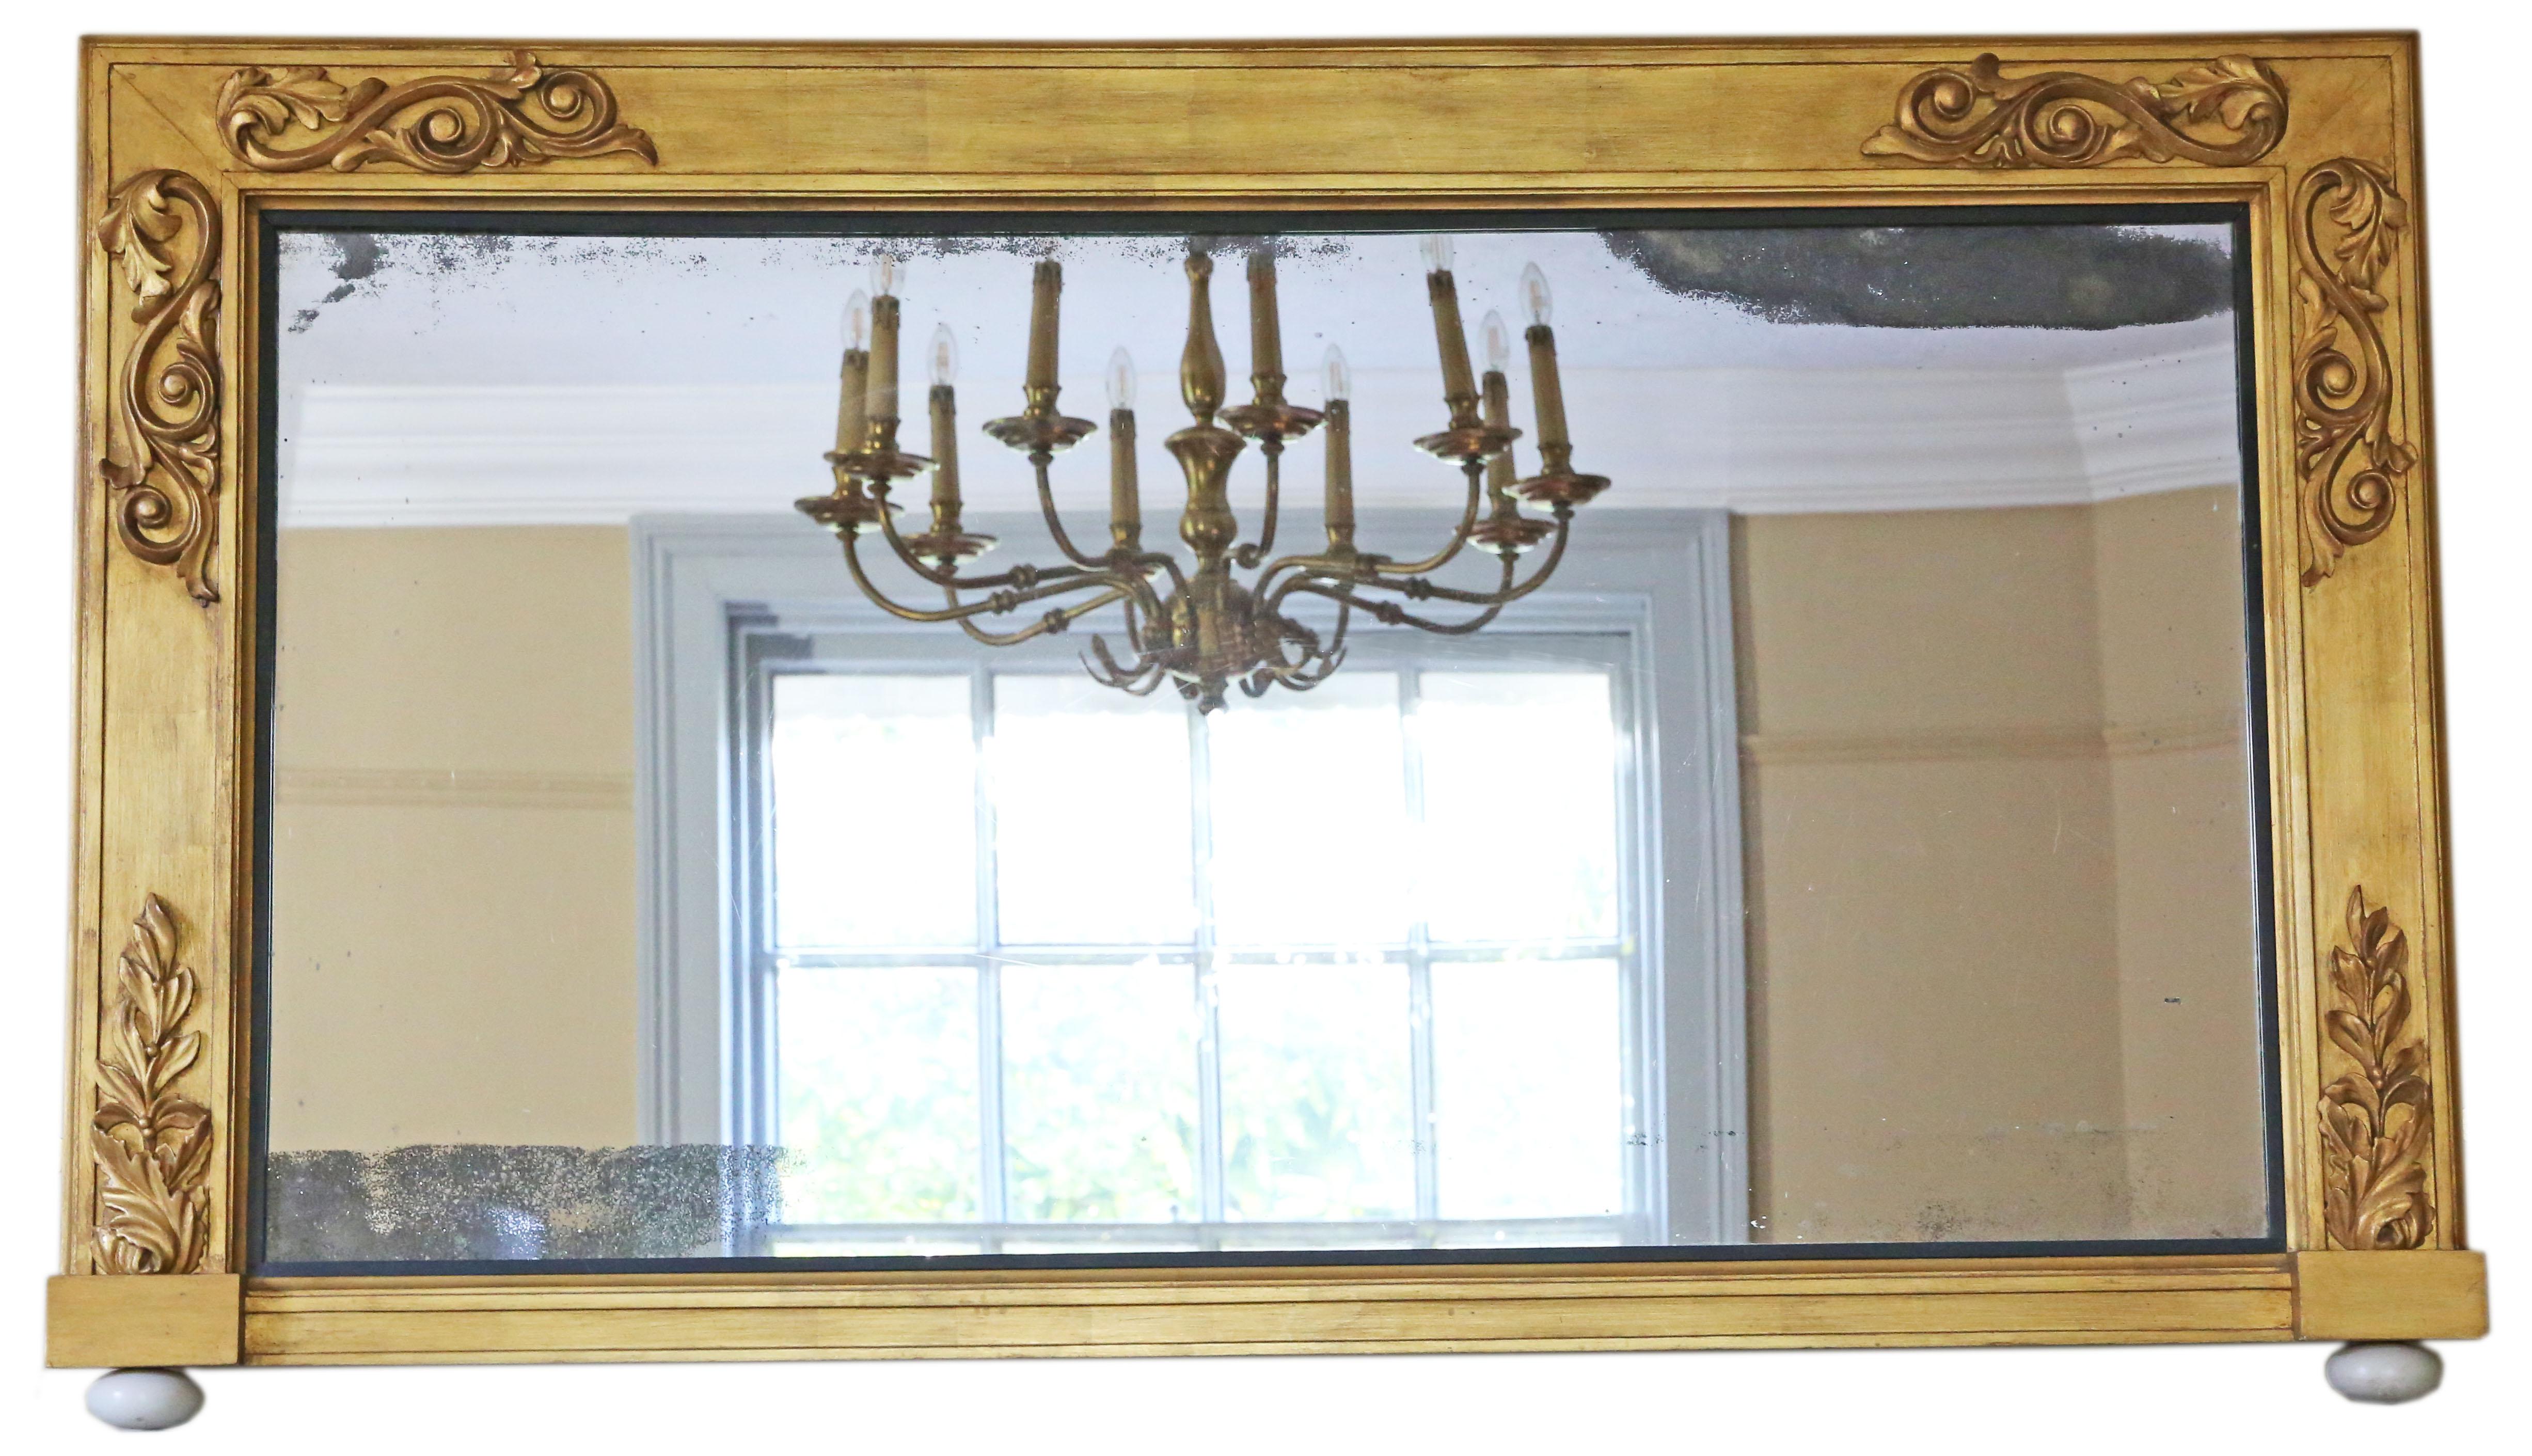 Antique large fine quality decorative giltwood overmantle wall mirror, 19th Century.

An impressive rare find, that would look amazing in the right location. No loose joints.

The original mirrored glass has medium oxidation and age related